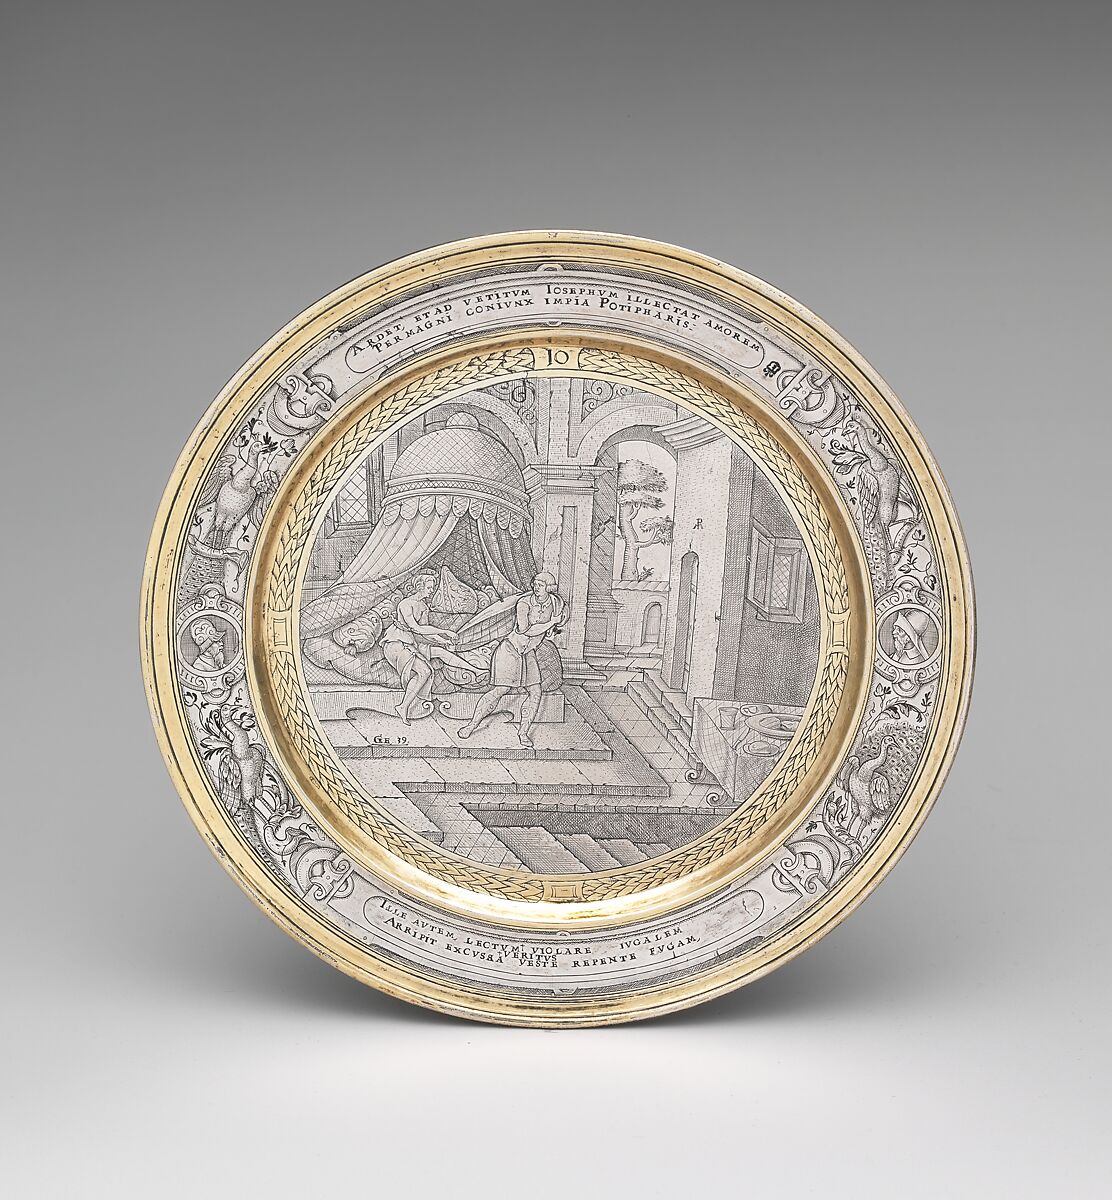 Joseph and Potiphar's wife, P.M., Silver, partly gilded, probably British